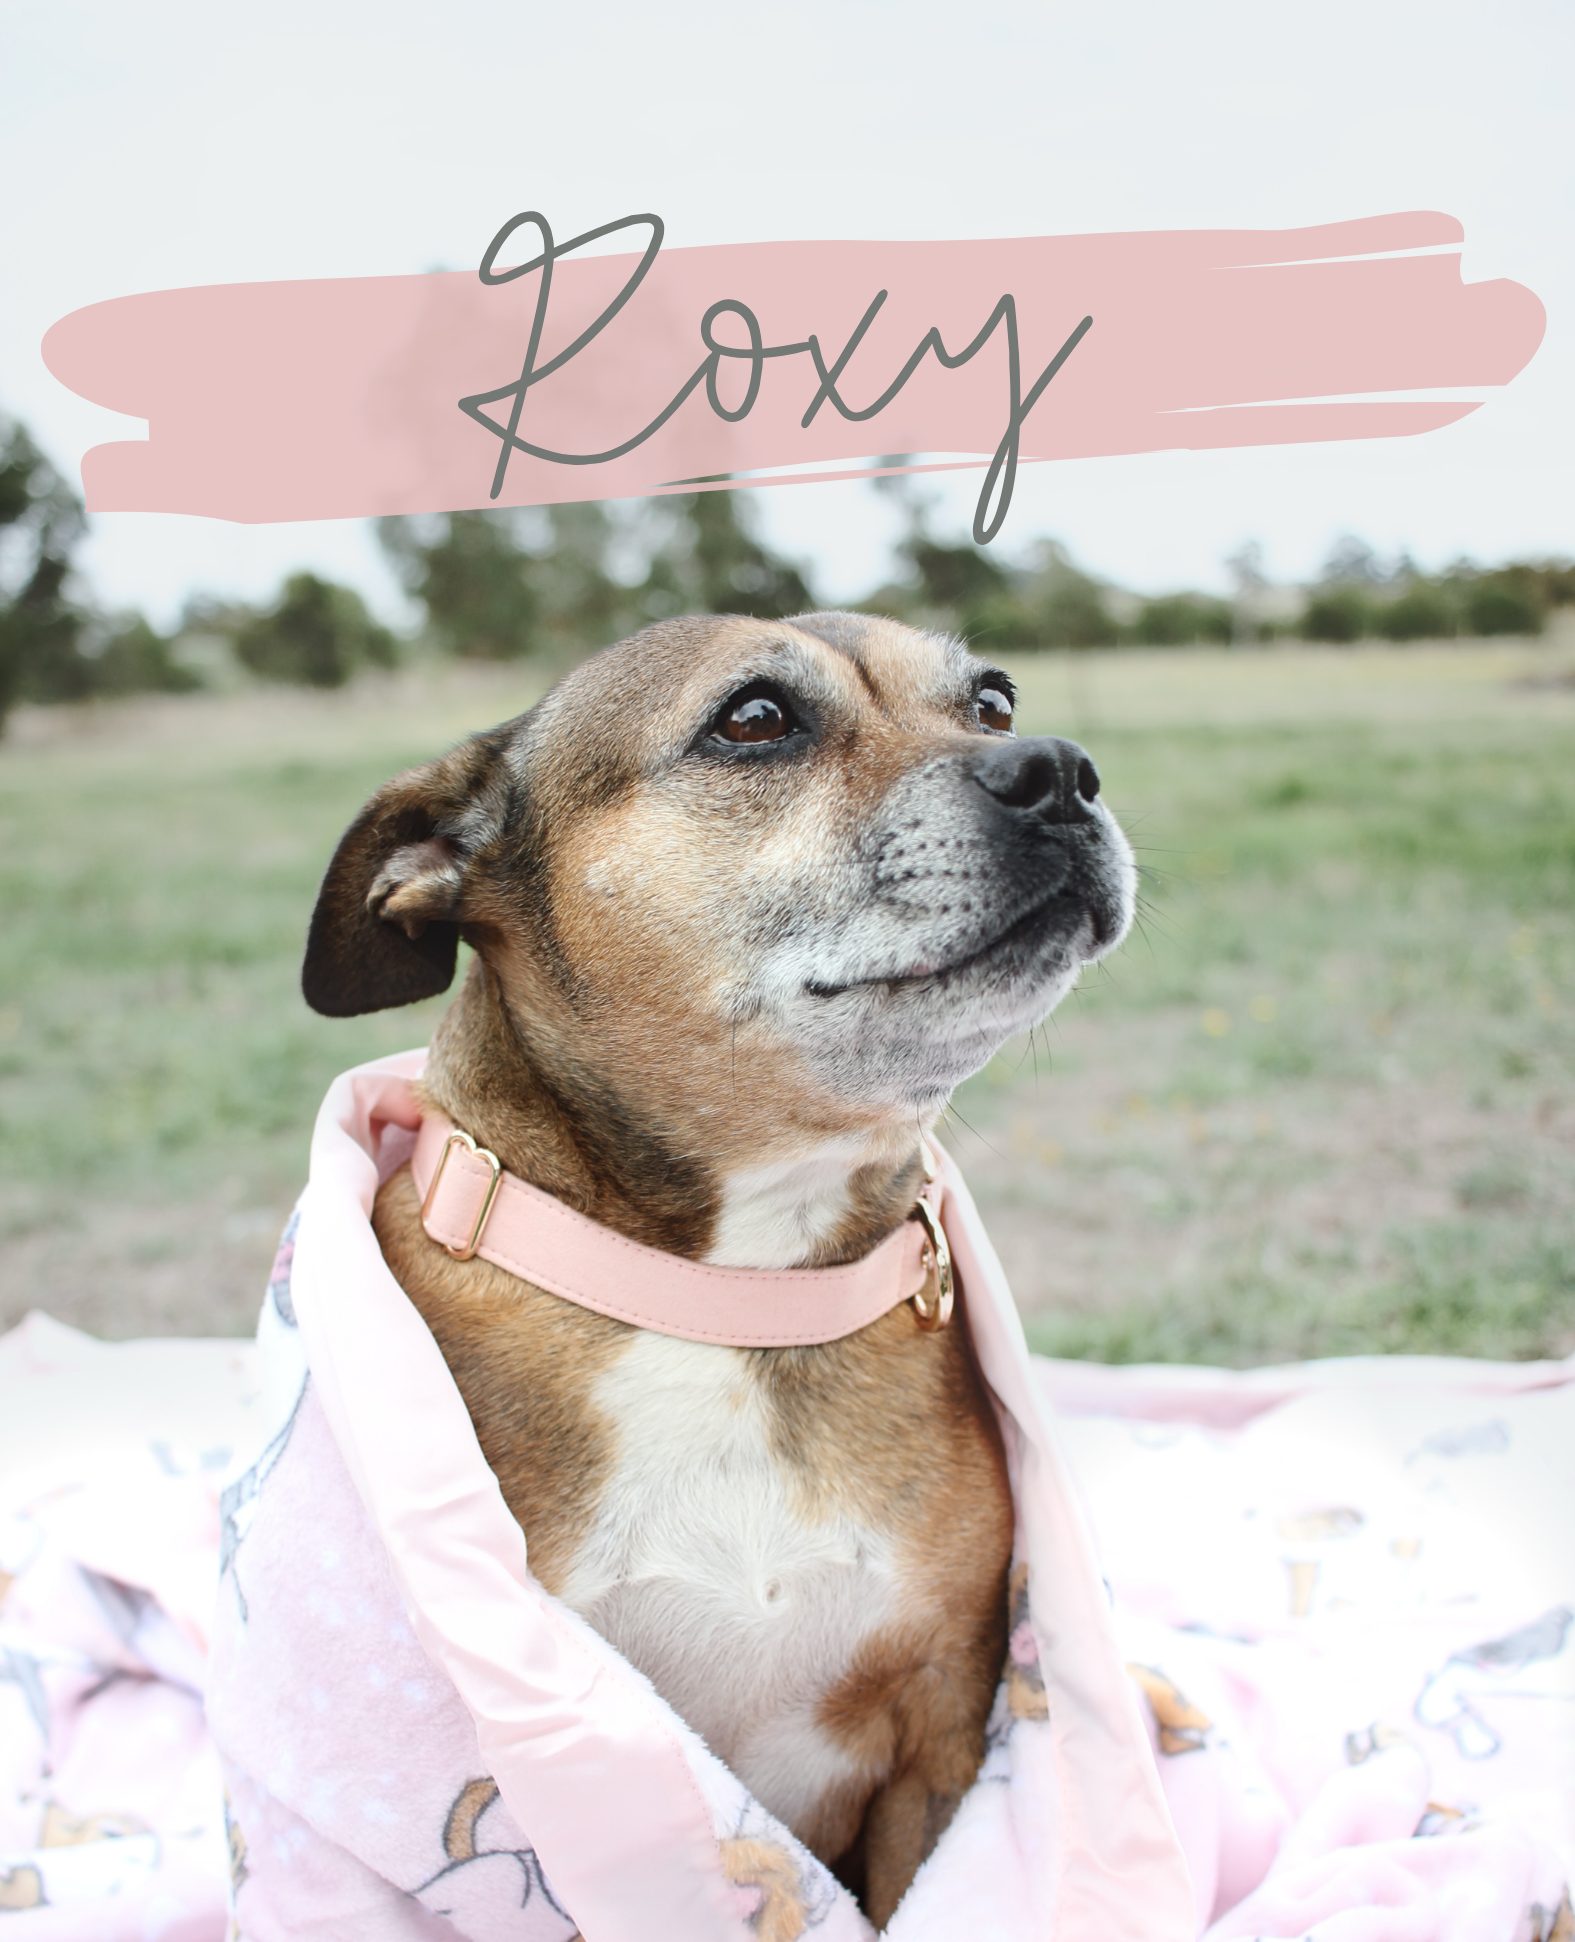 Roxy is ADOPTED - MEET ROXY FROM STAFFORD RESCUE VICTORIA